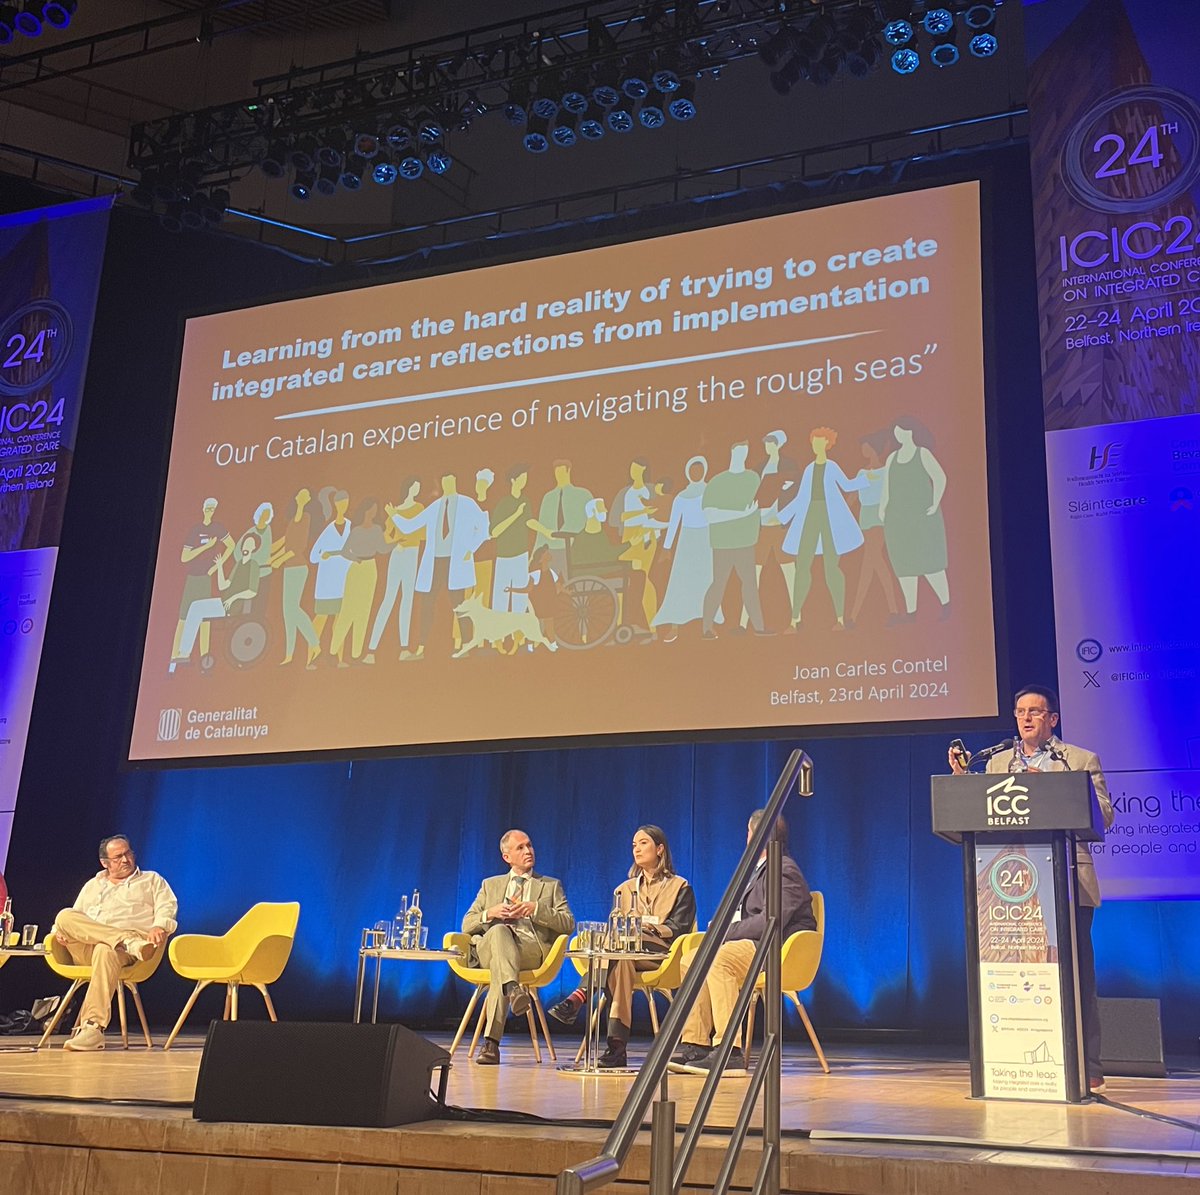 Juan Carles Contel @conteljc from @salutcat Catalonia reflects on the journey towards #integratedcare and the lessons learnt the hard way through experience #ICIC24